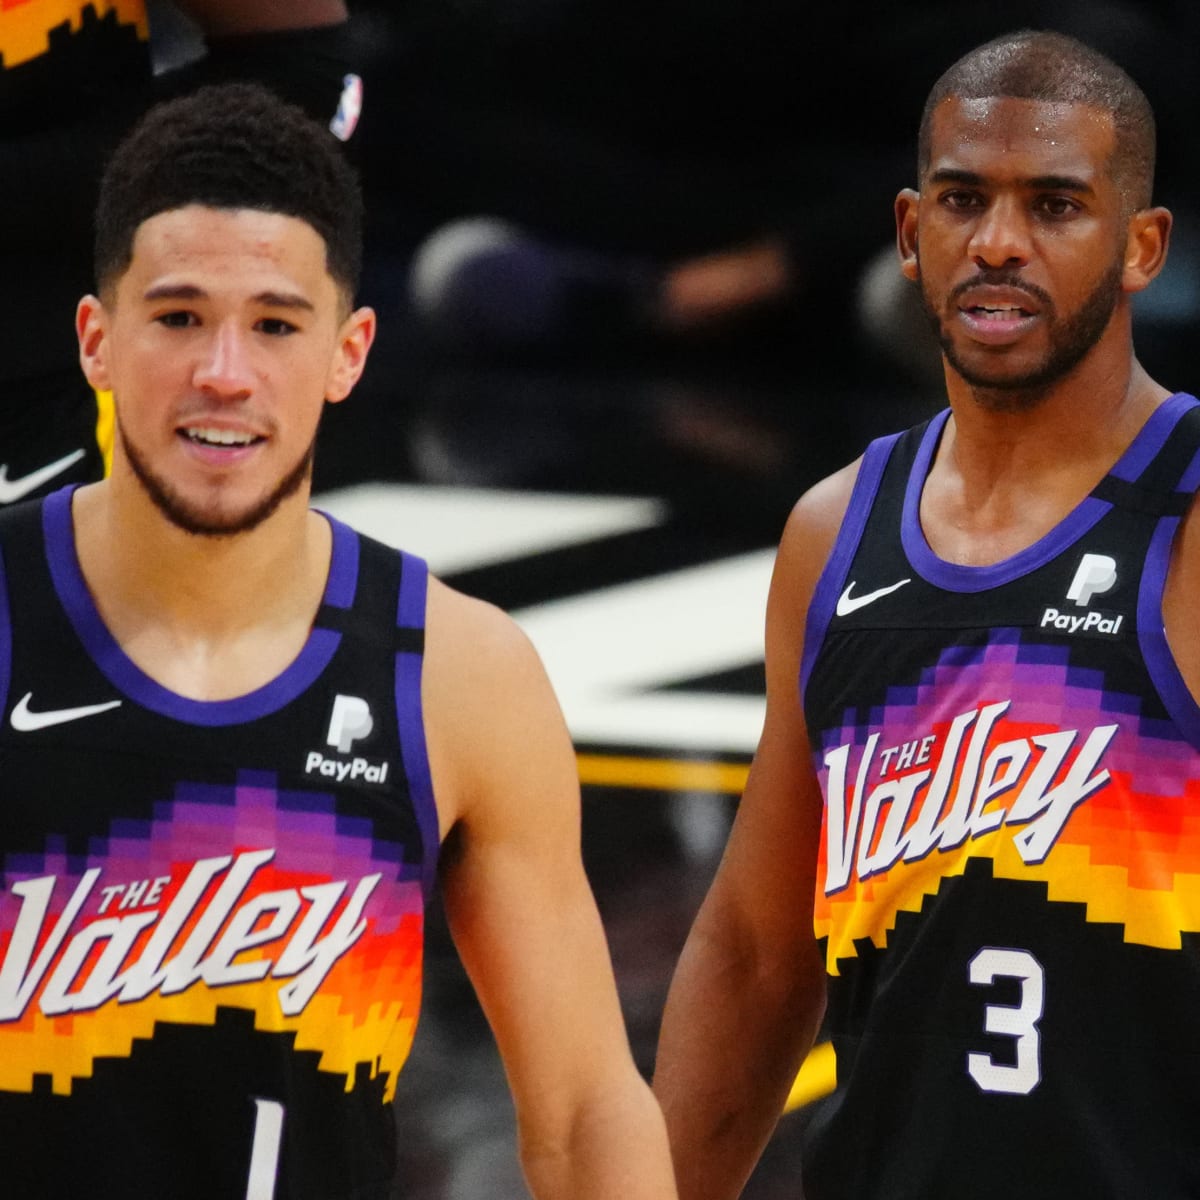 NBA 2022: Chris Paul stars for Phoenix Suns in playoff win over